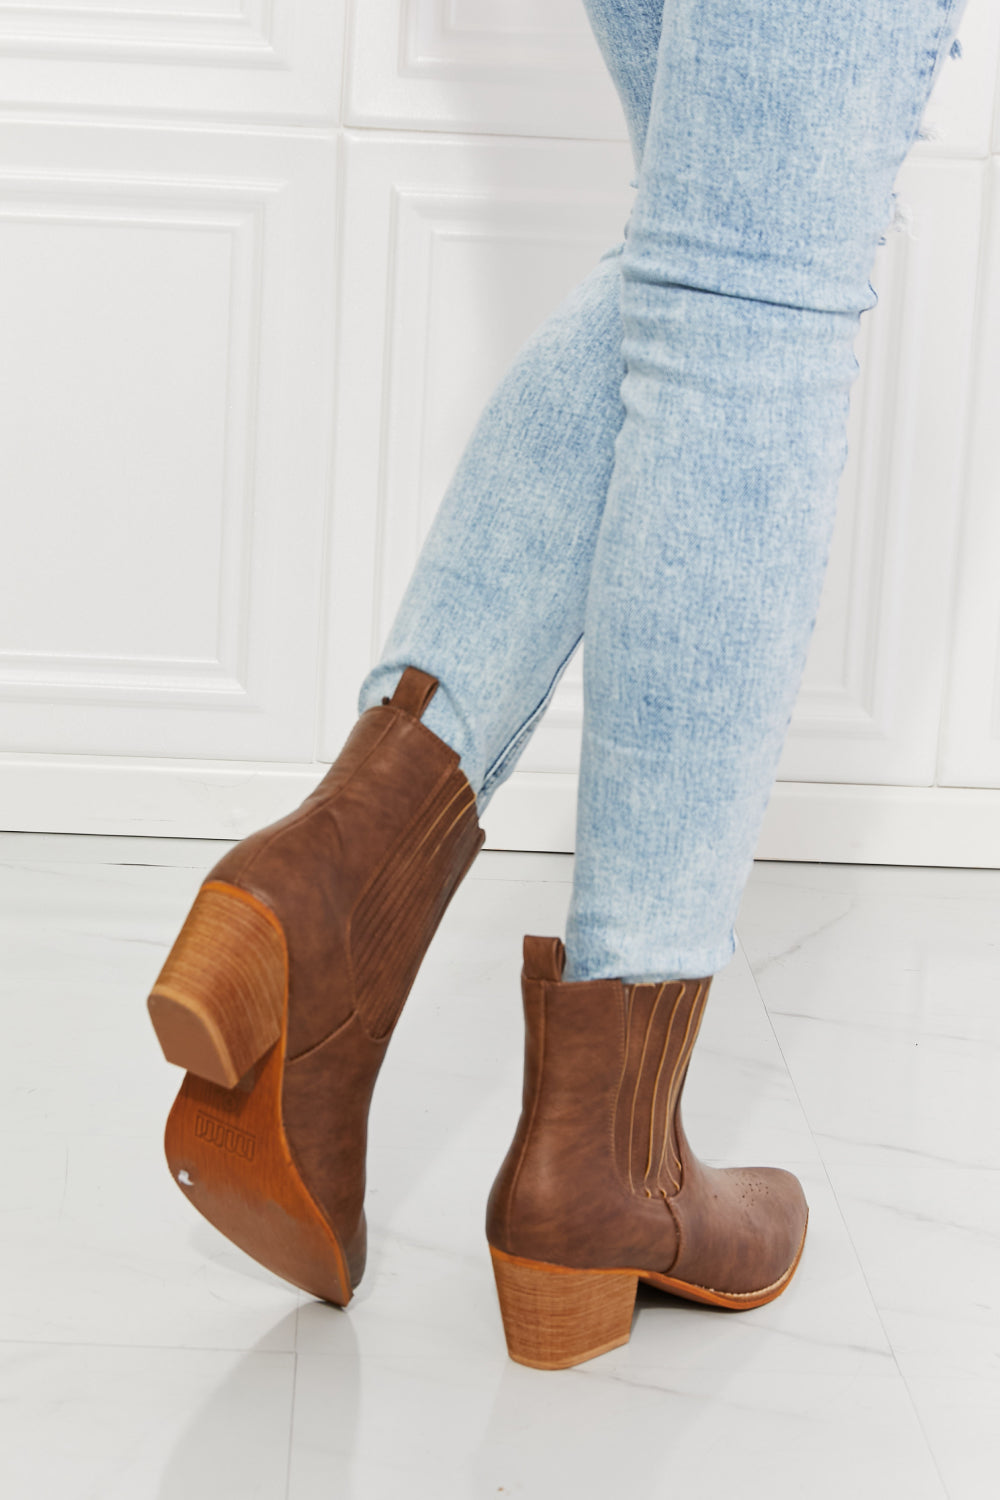 MMShoes Love the Journey Stacked Heel Chelsea Boot in Chestnut - nailedmoms